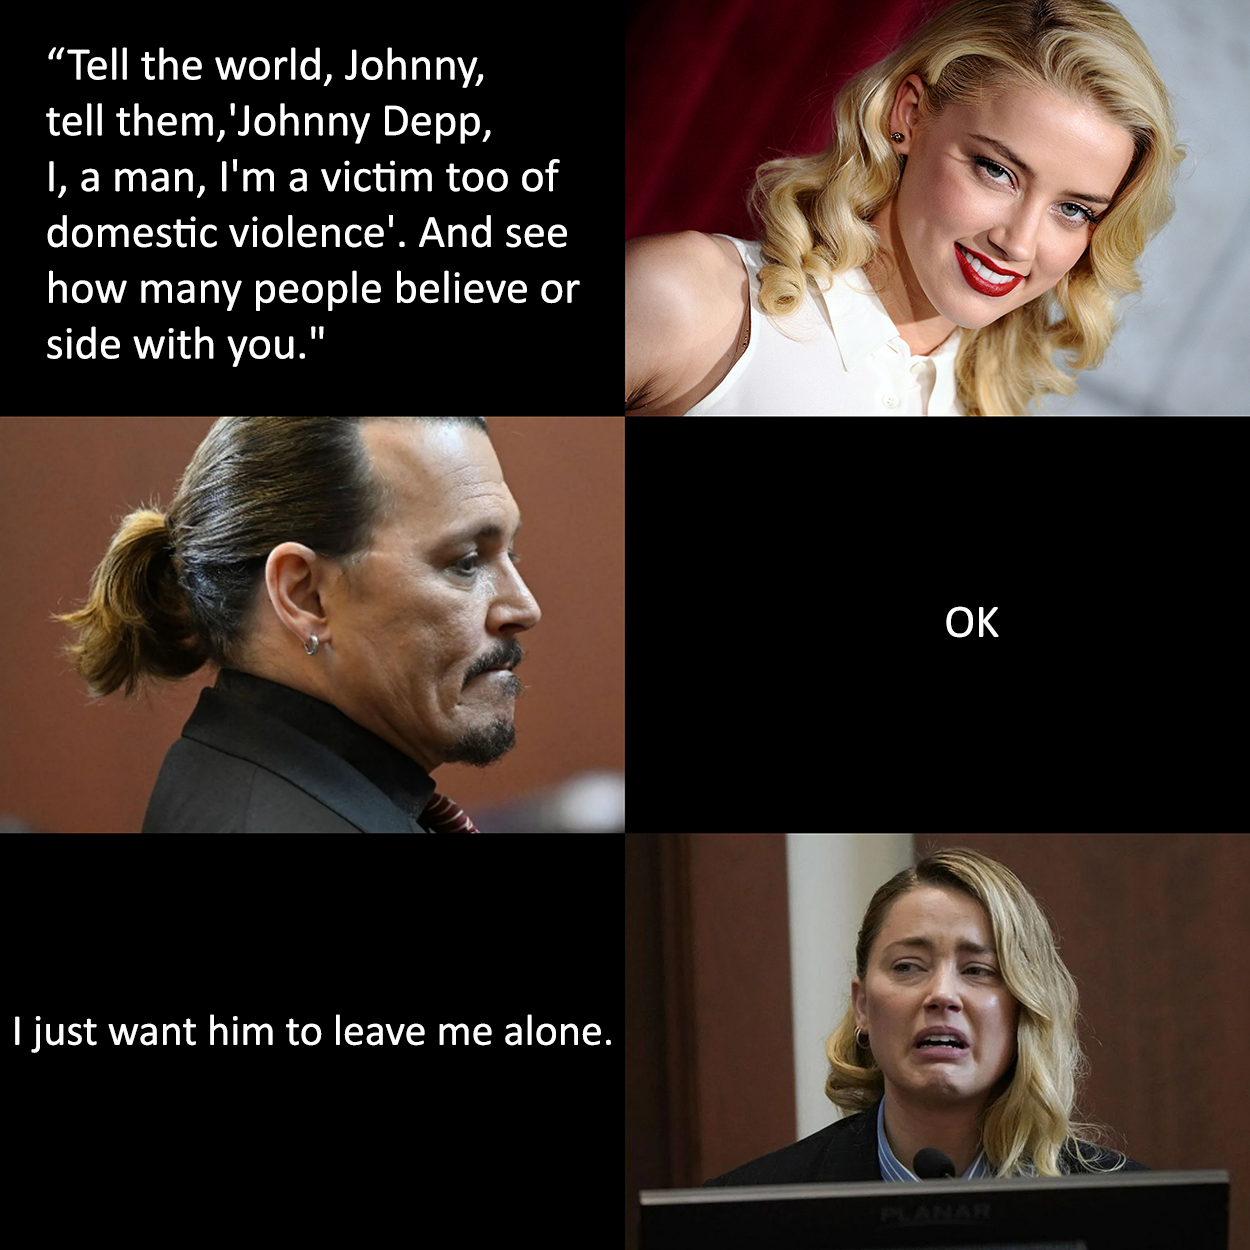 funny memes - dank memes - amber heard court crying - "Tell the world, Johnny, tell them, 'Johnny Depp, I, a man, I'm a victim too of domestic violence'. And see how many people believe or side with you." I just want him to leave me alone. Ok